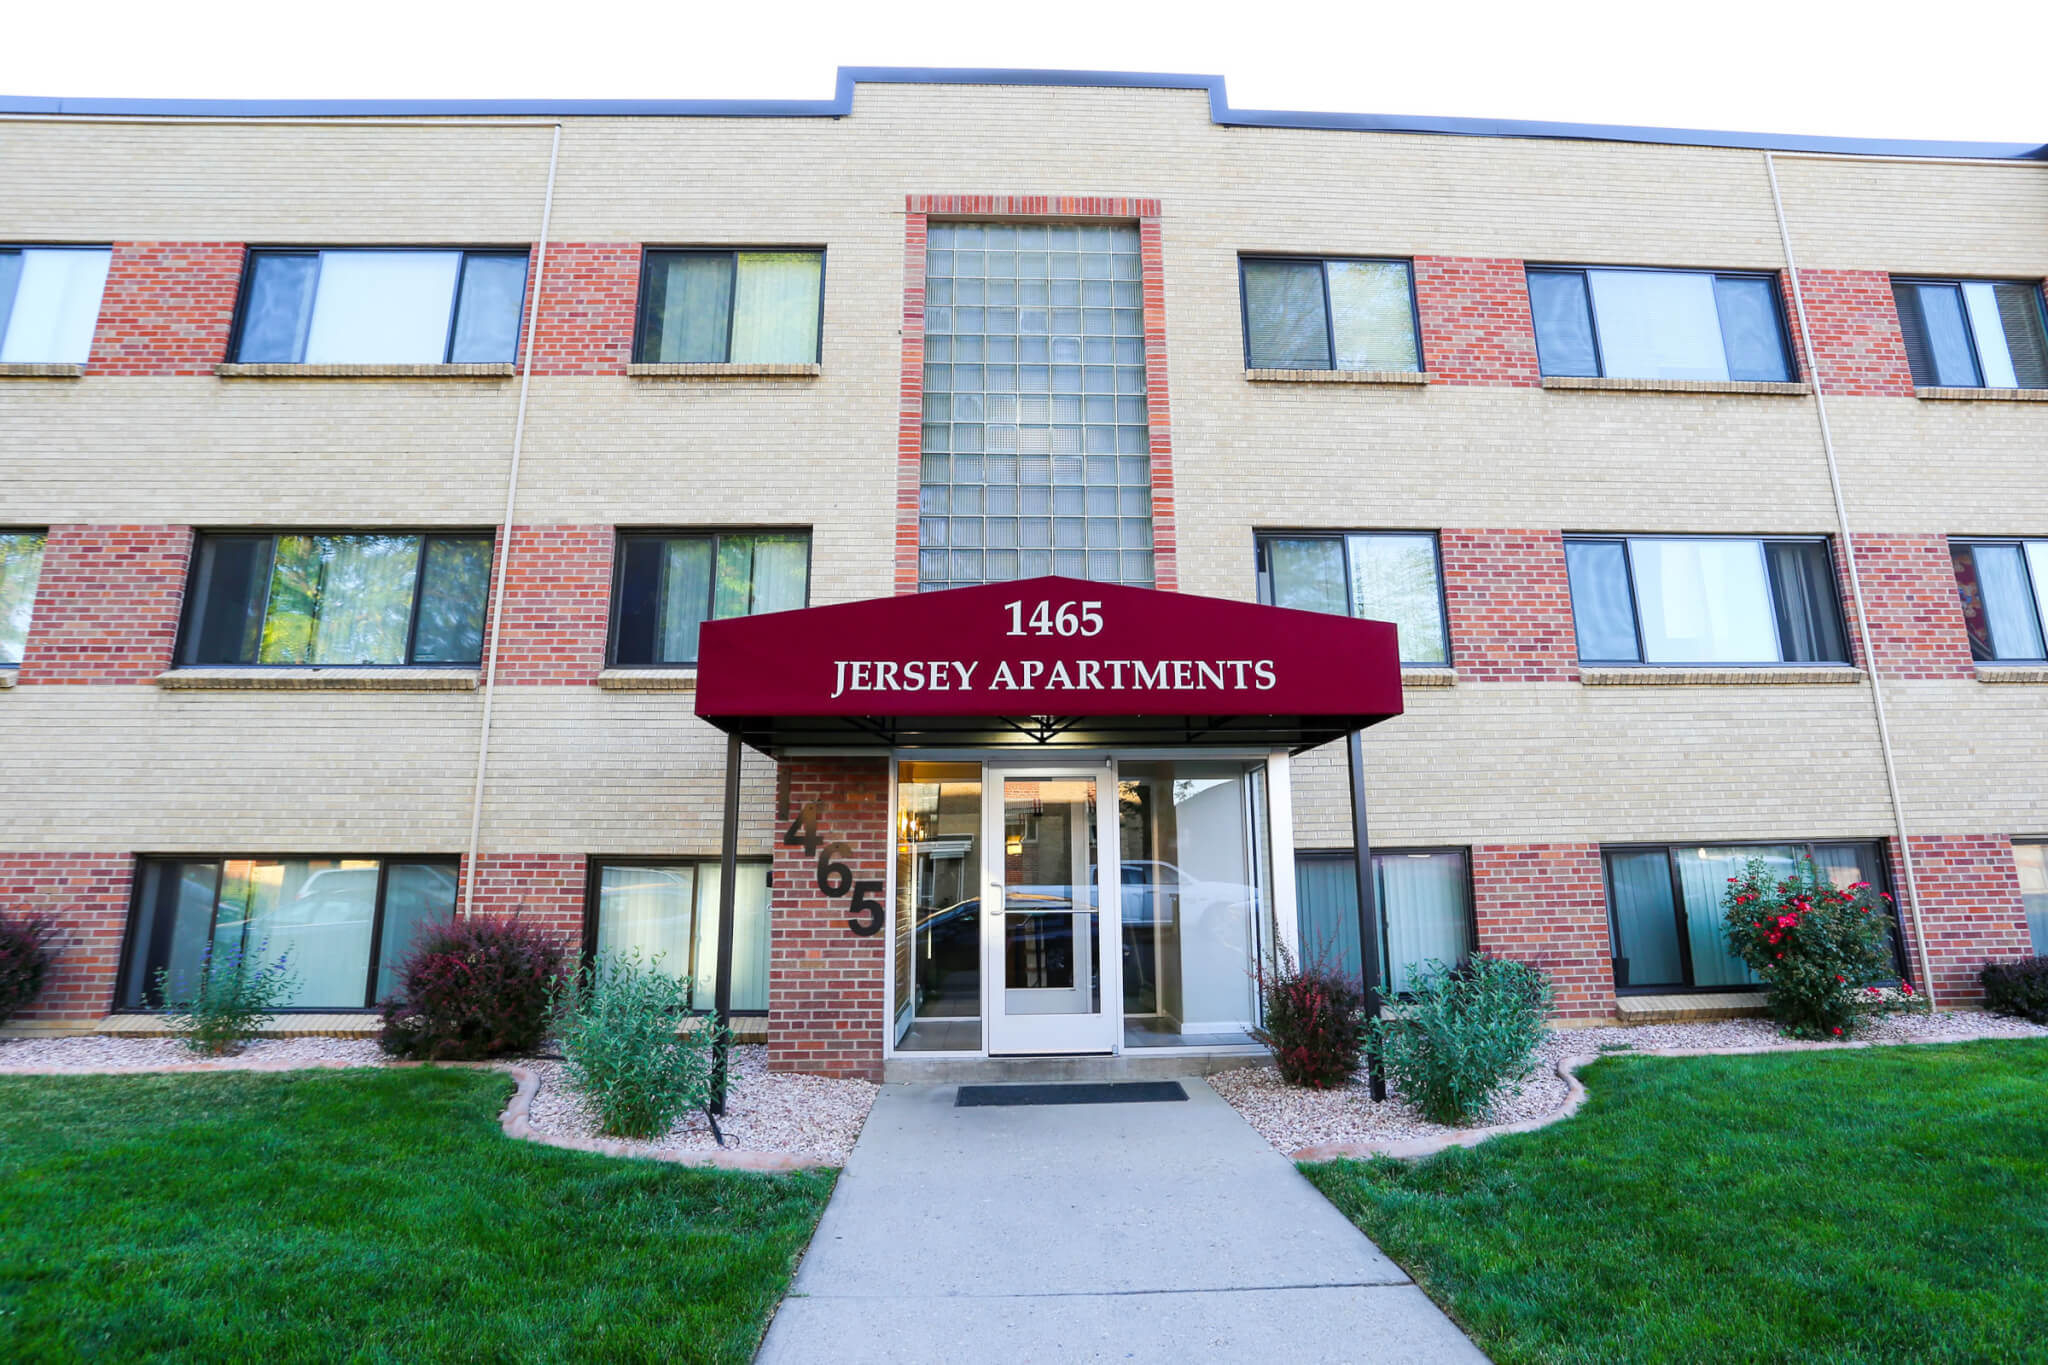 Just Sold: AQYRE Brokers Sale of Jersey Apartments for $4.9M